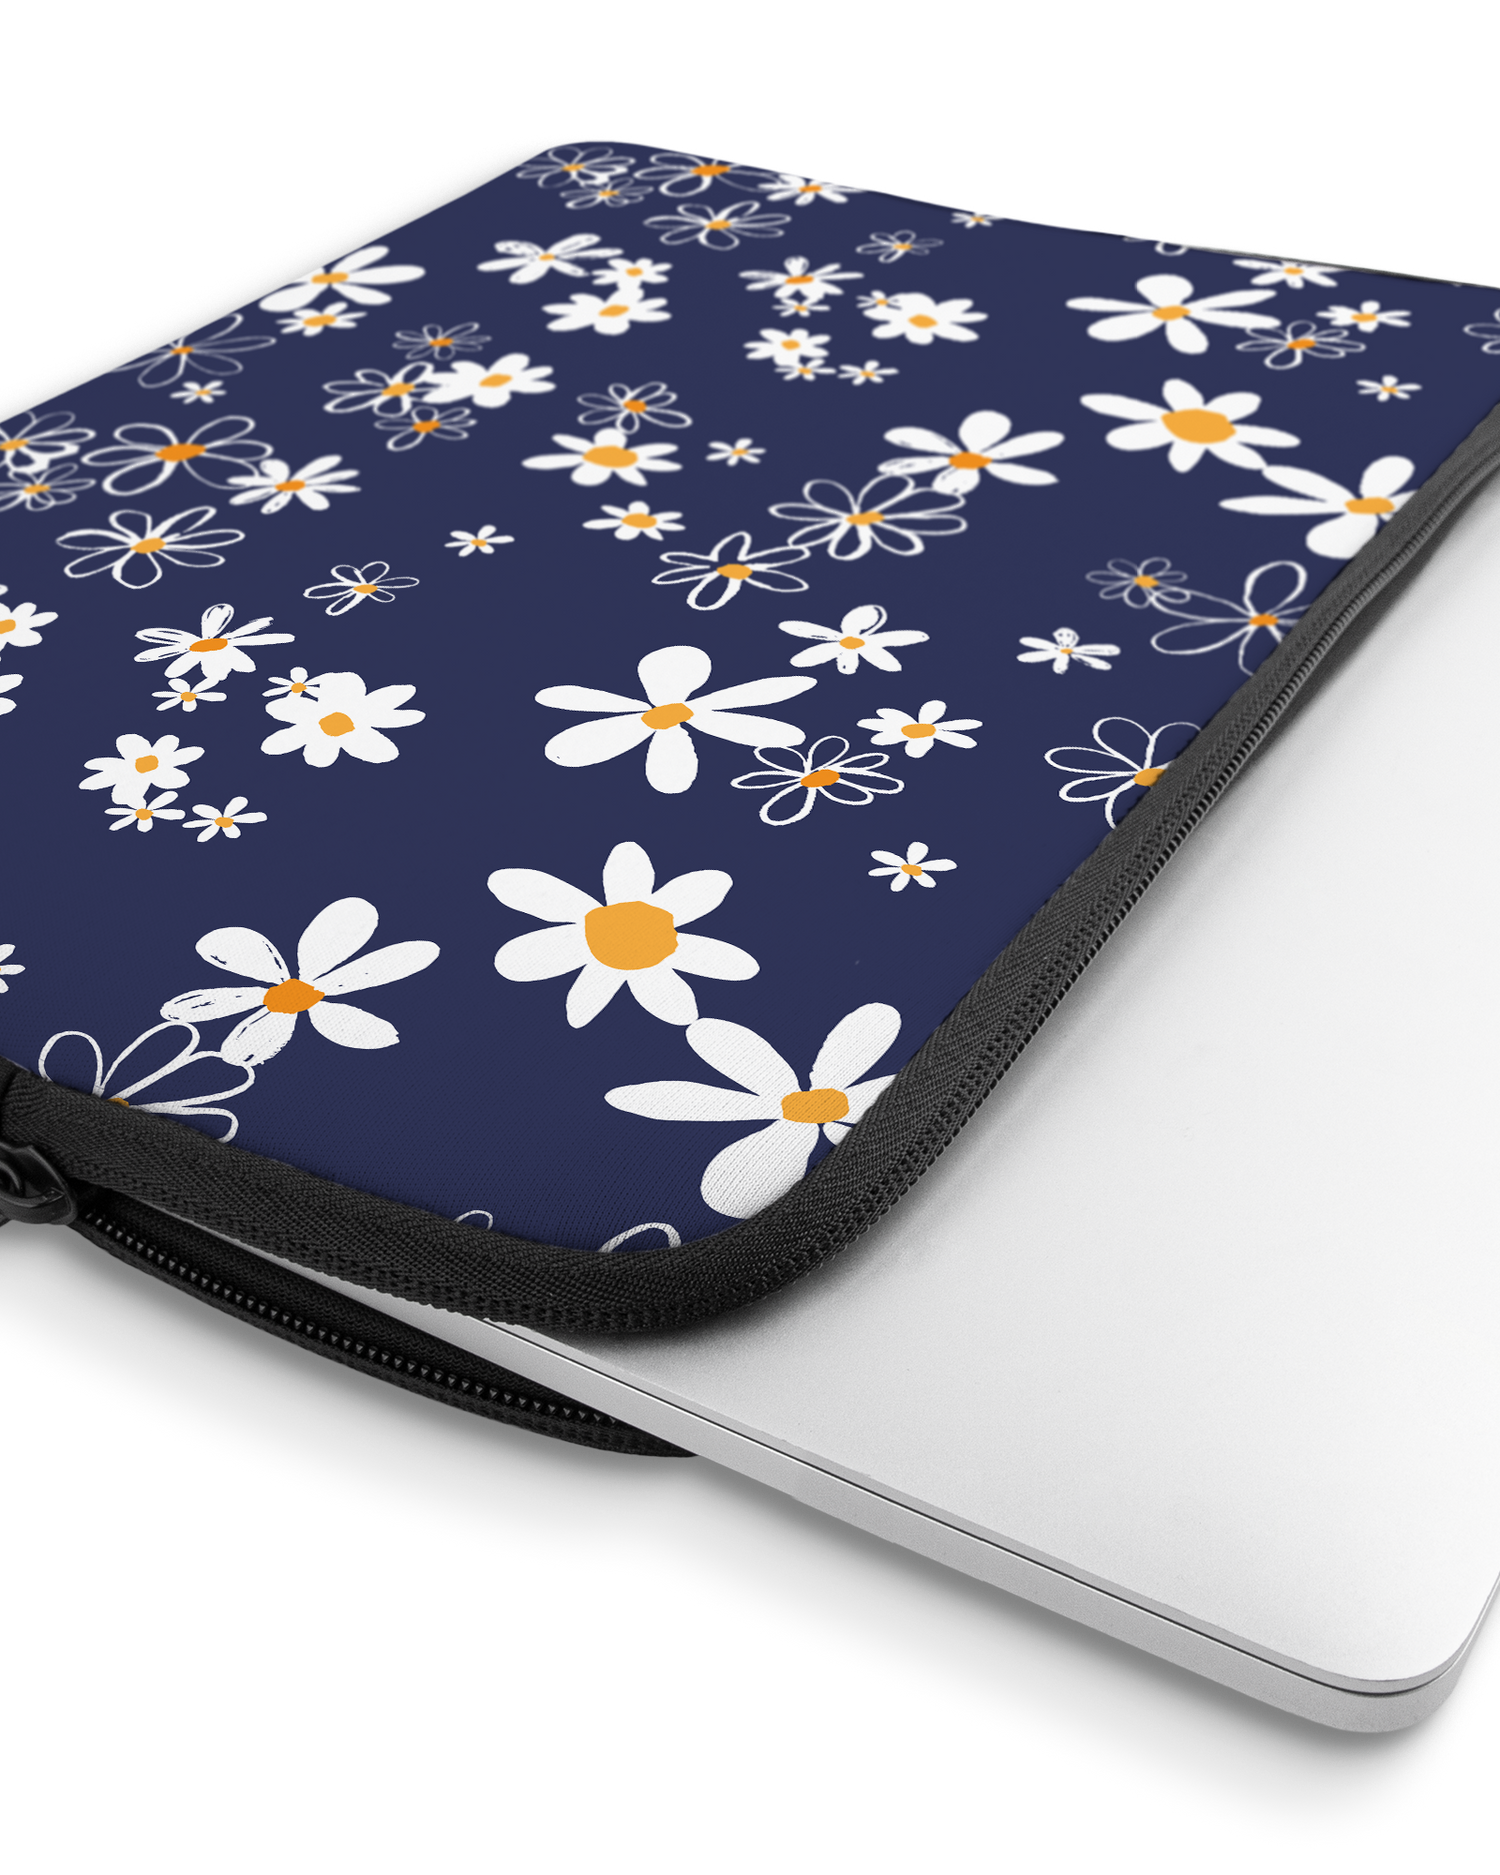 Navy Daisies Laptop Case 13 inch with device inside